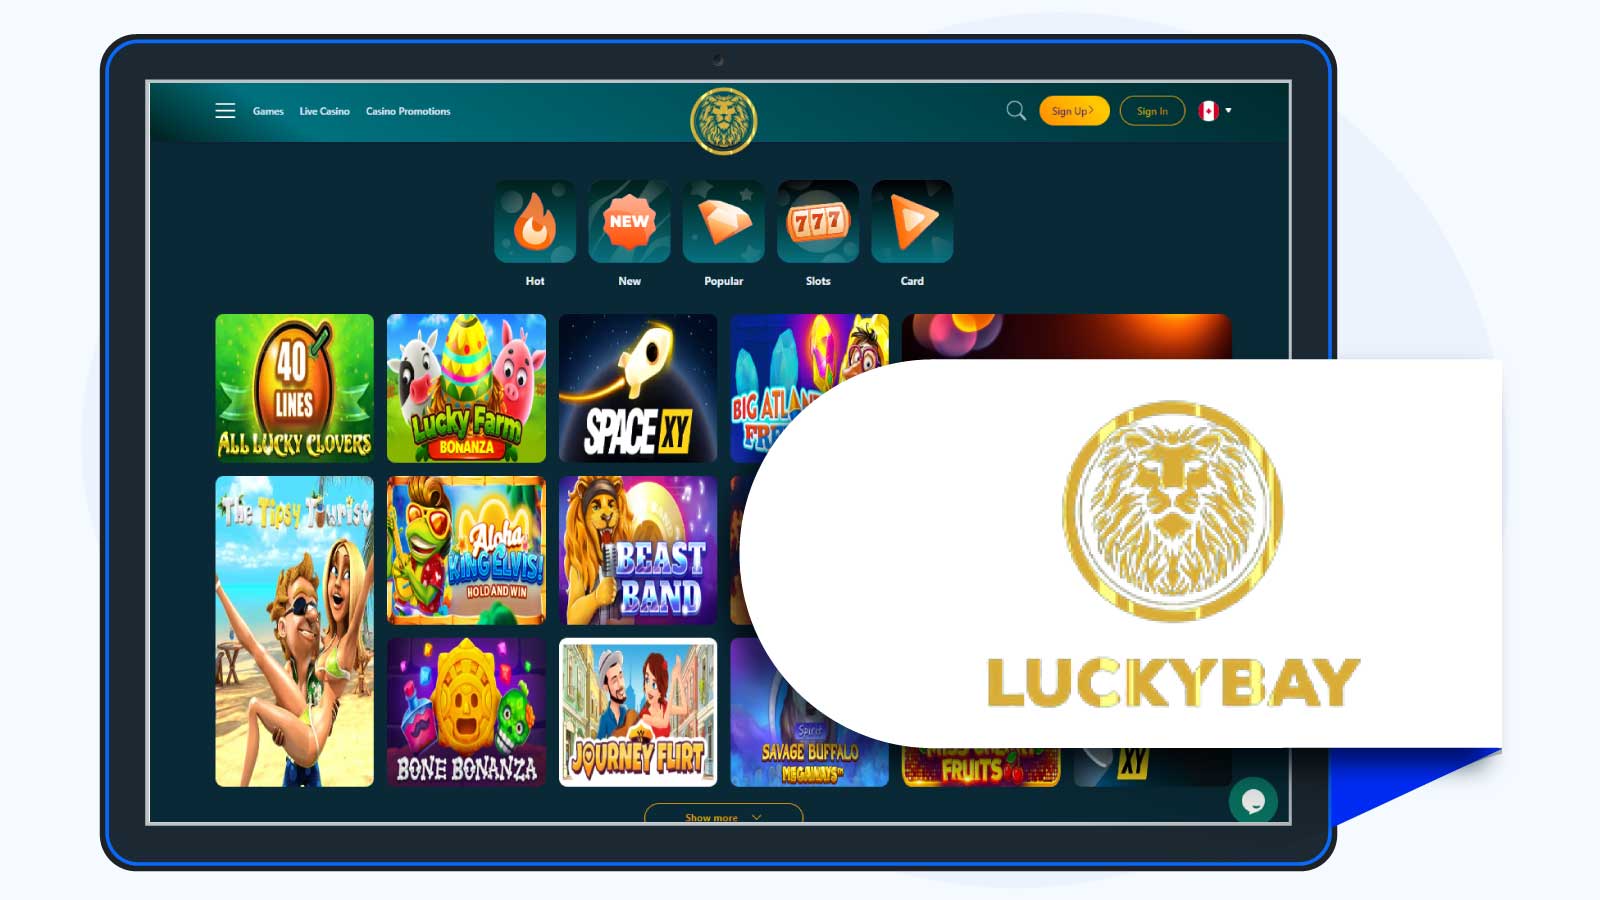 LuckyBay Casino Best Online Casino For Bonuses And Promotions